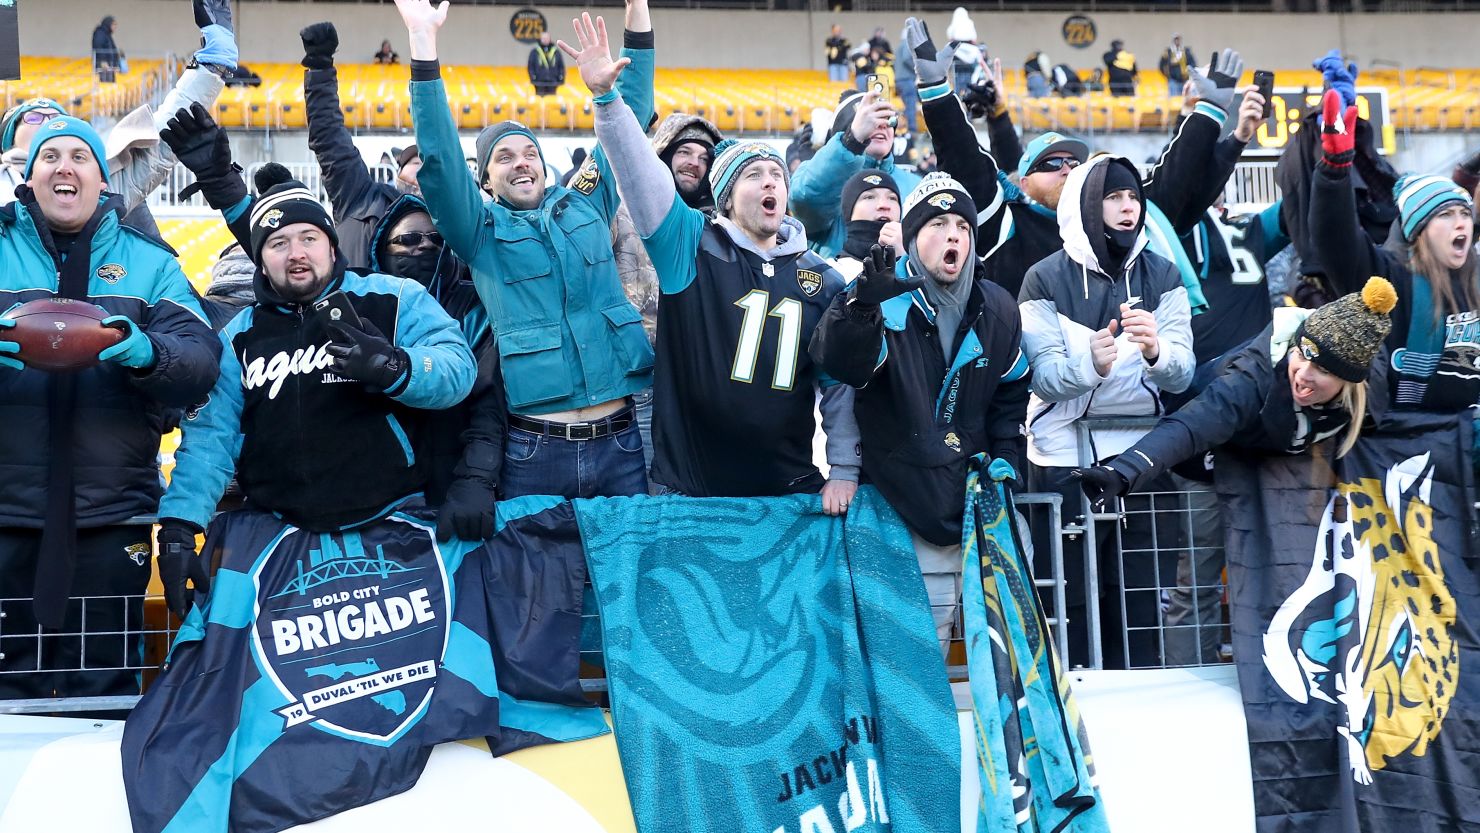 Jaguars fans celebrate after Jacksonville defeated the Steelers in the AFC divisional playoff game at Heinz Field in Pittsburgh, Pennsylvania.